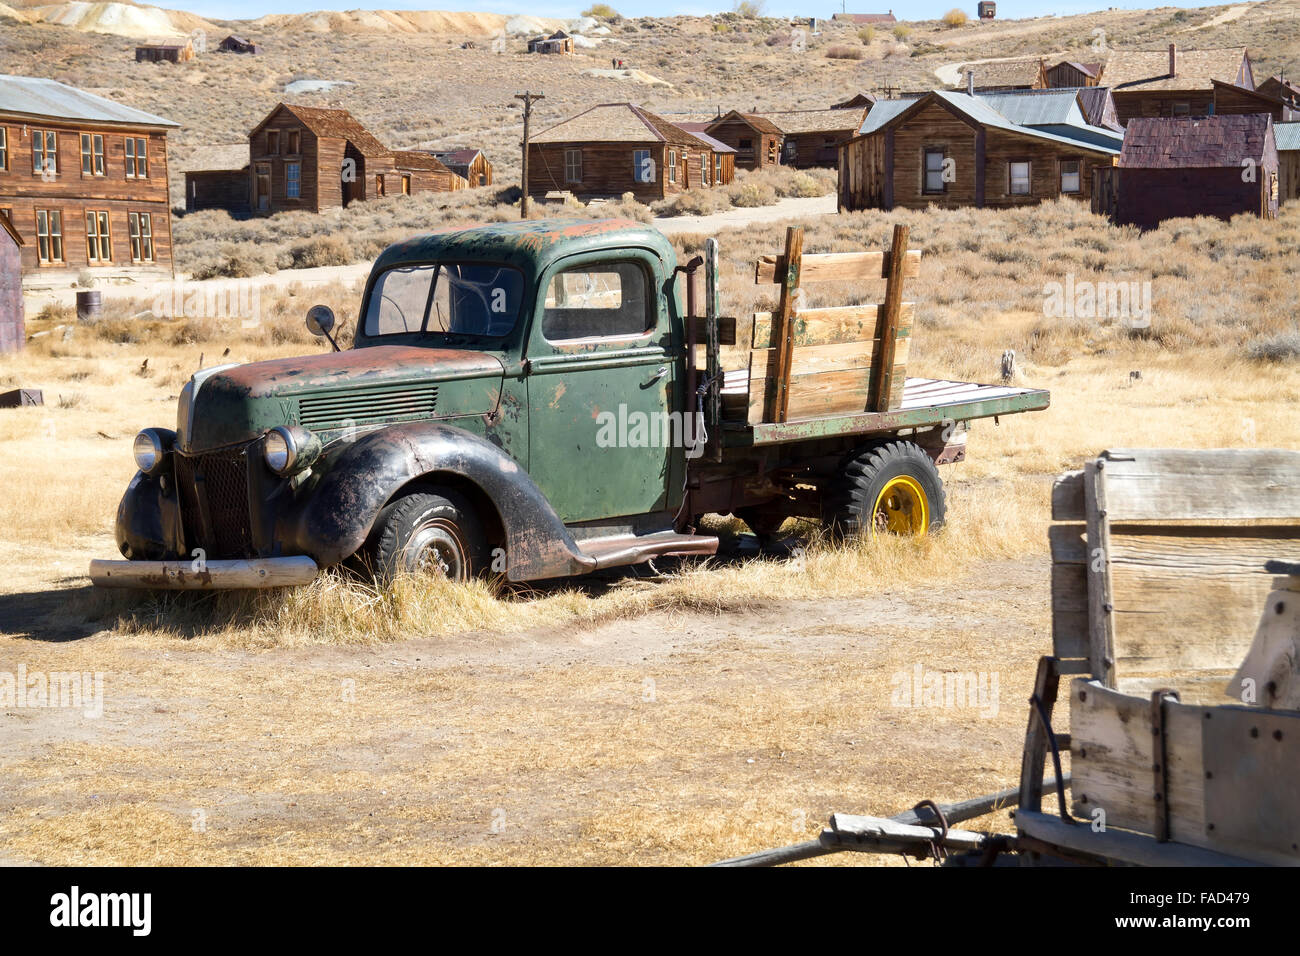 Old abandon truck in the Bodie Ghost Town, Bodie California Stock Photo